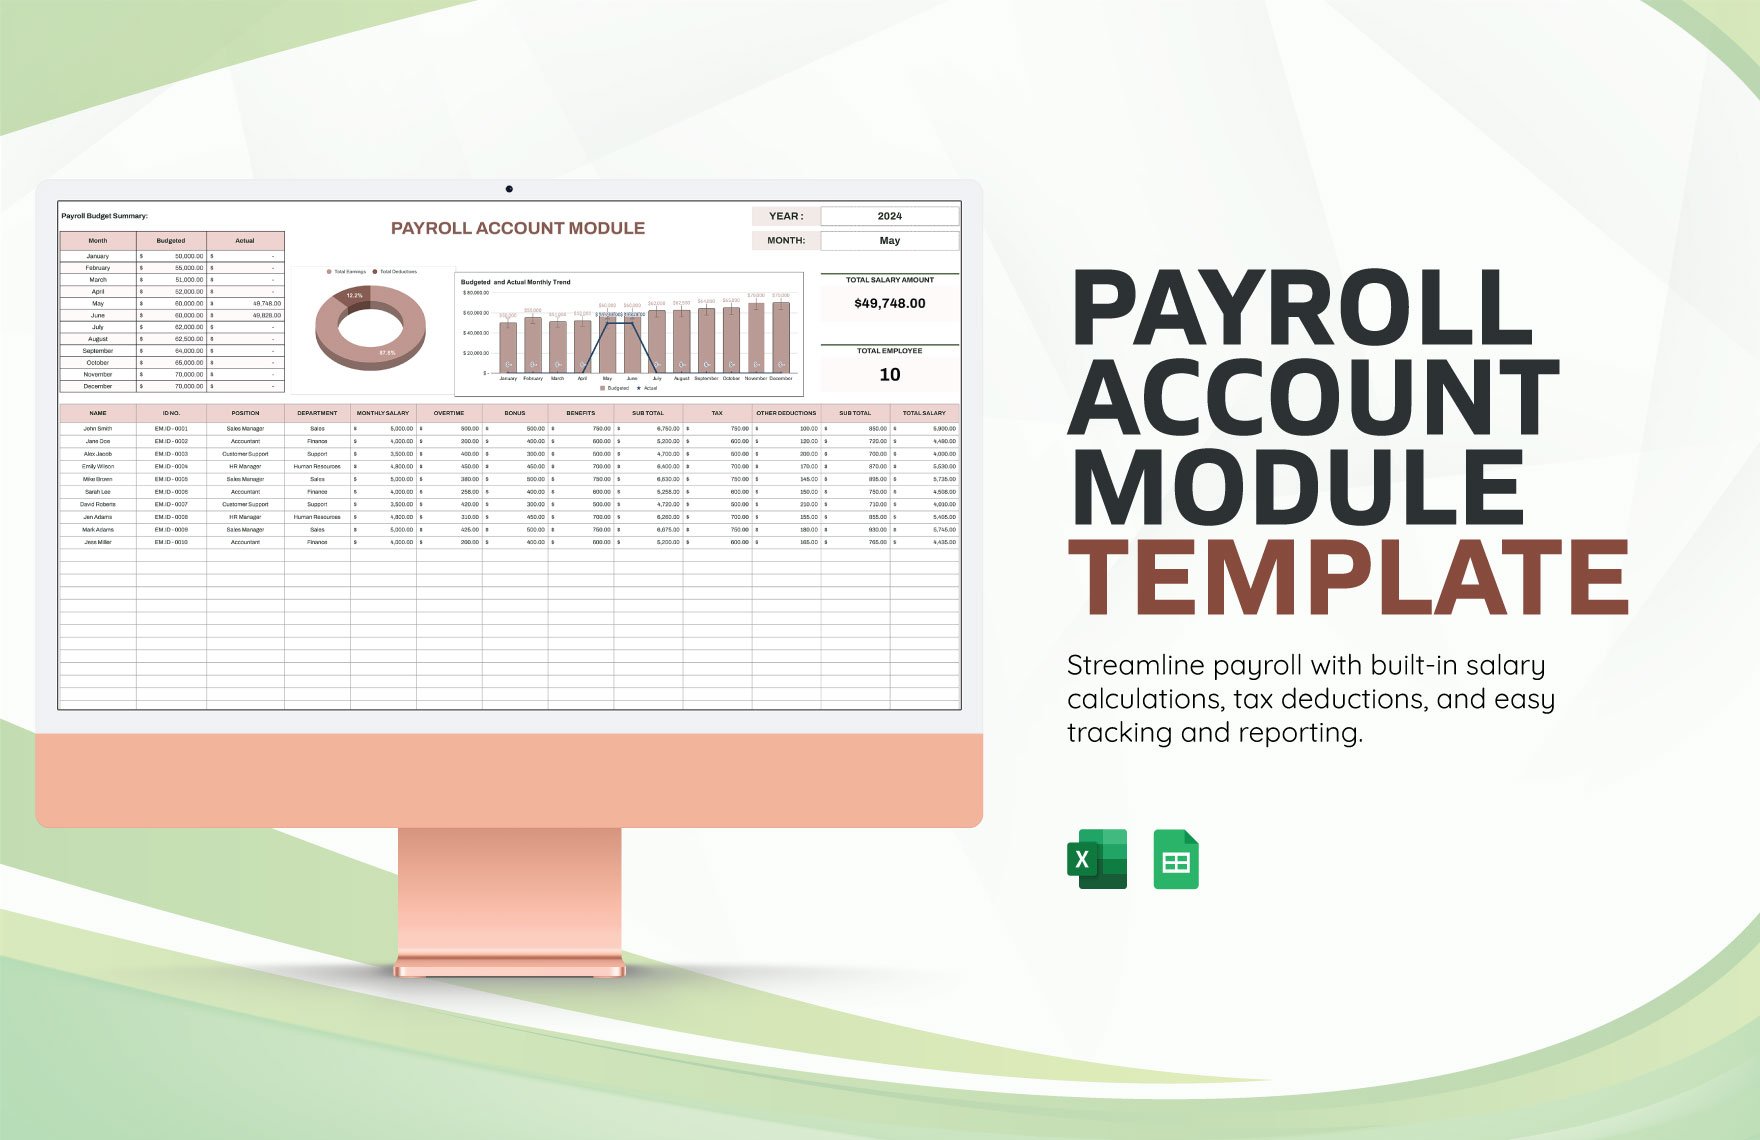 Payroll Account Module Template in Excel, Google Sheets